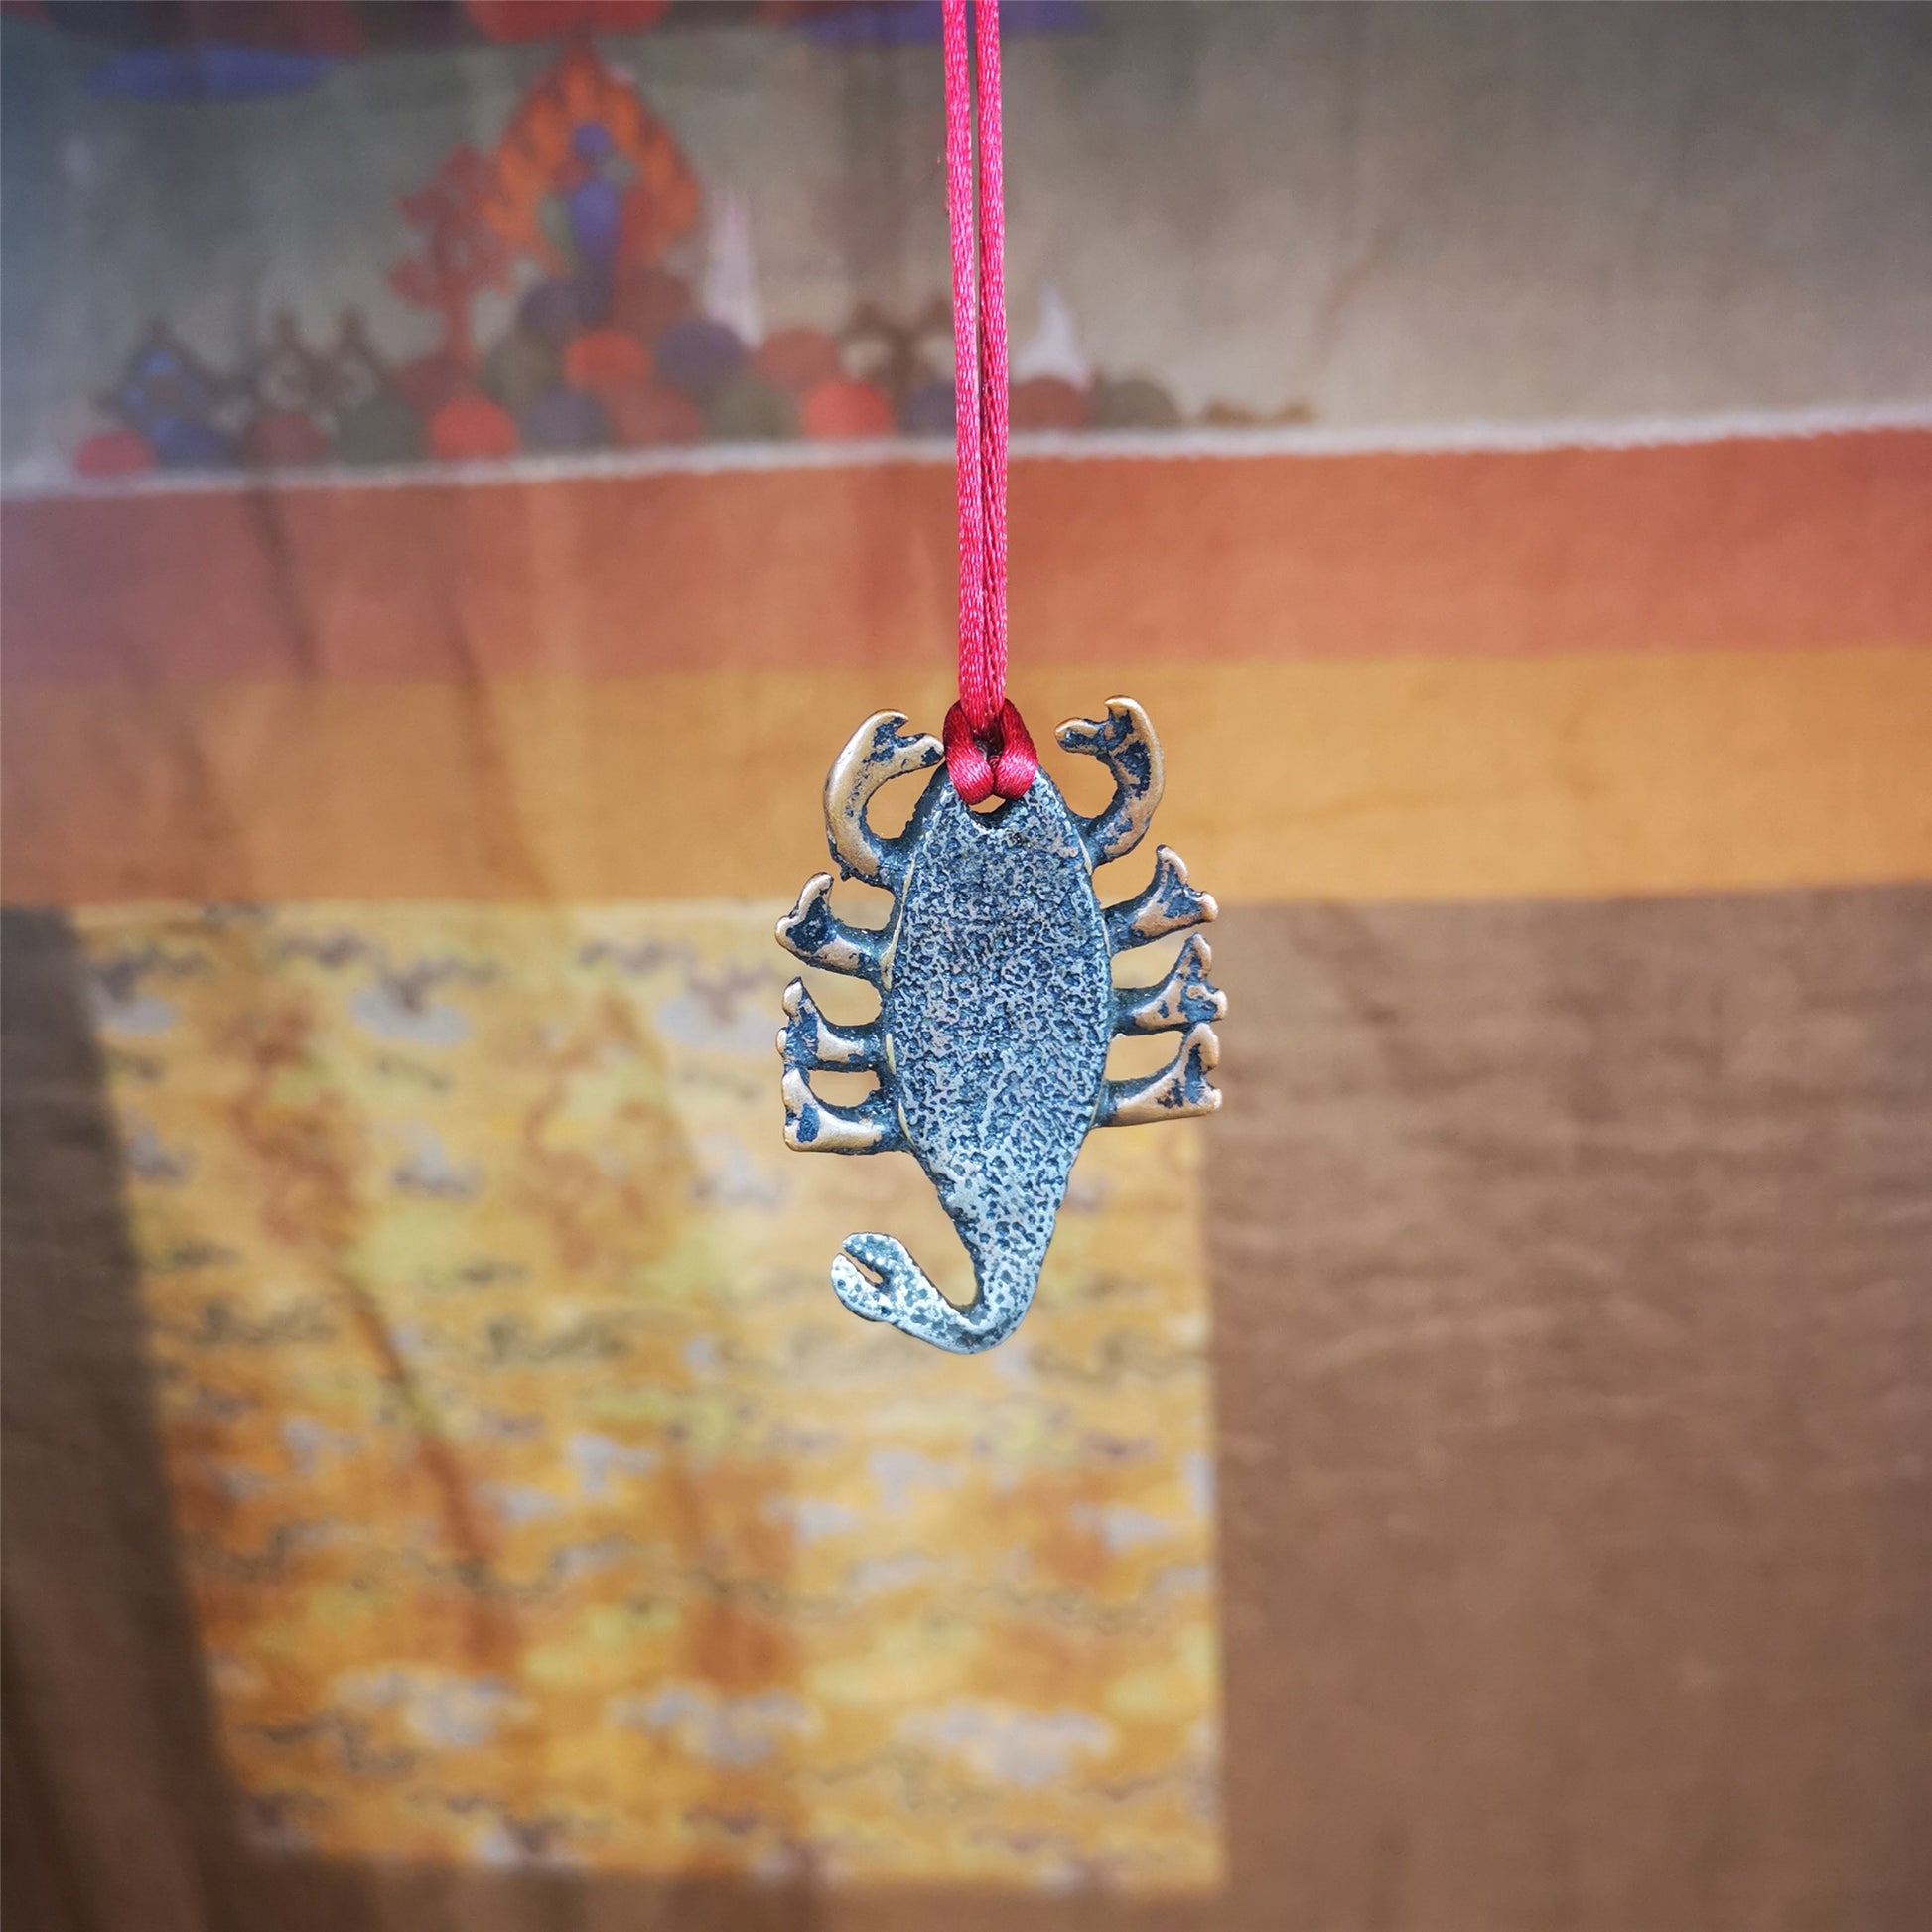 This scorpion amulet is made by Tibetan craftsmen in Hepo Township, Baiyu County, the birthplace of the famous Tibetan handicrafts. It is made of cold iron and copper,black color, size is 1.6 × 1.2 inches.The body is cold iron,and the legs are copper wire. You can make it into a necklace, or a keychain, or just put it in your shrine.